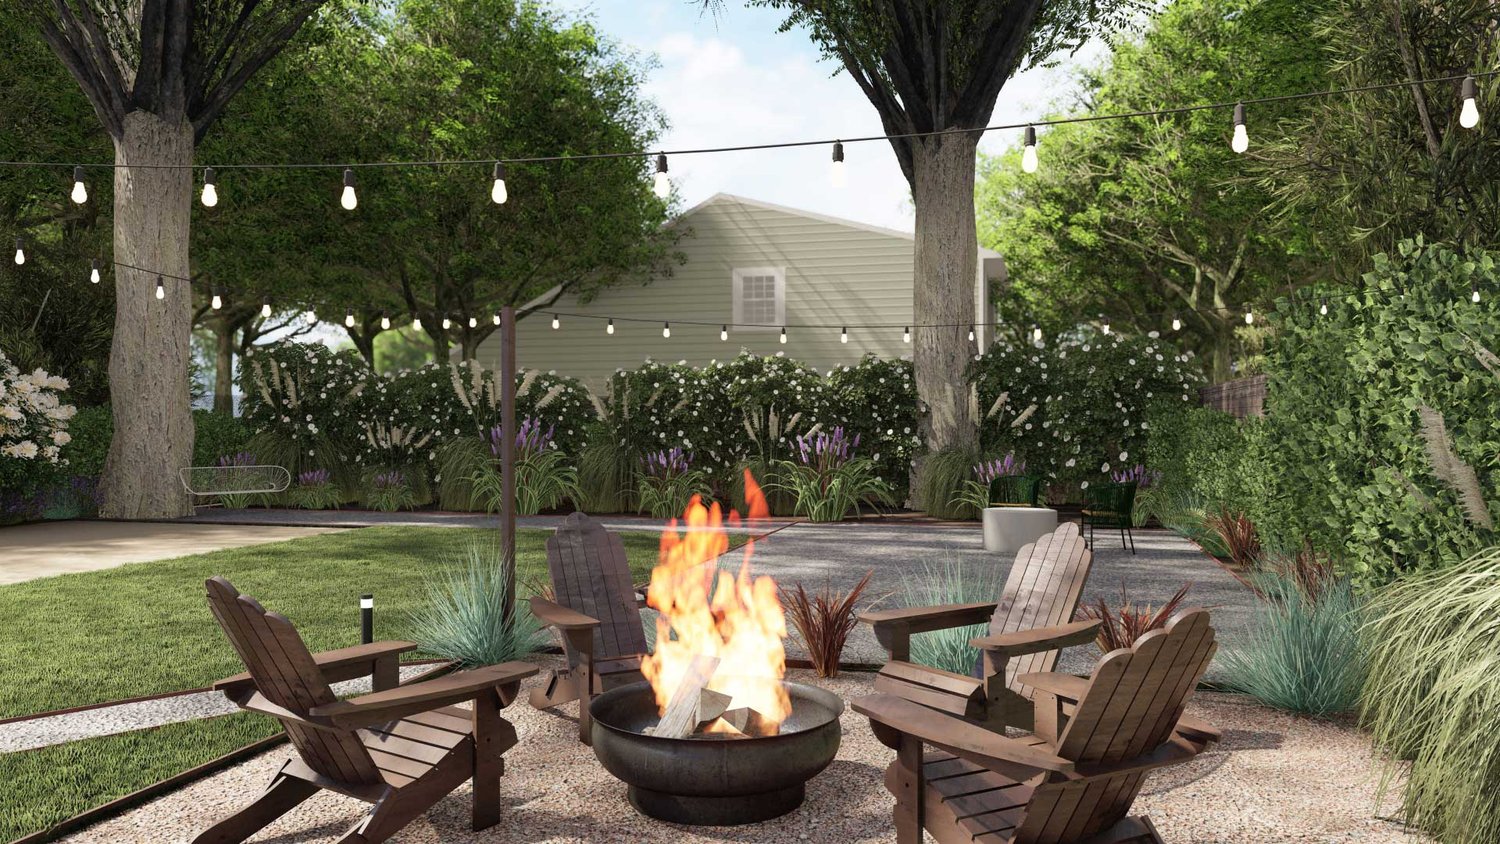 Arlington outdoor gravel patio fire pit seating area with string lights, lawn, trees and plants